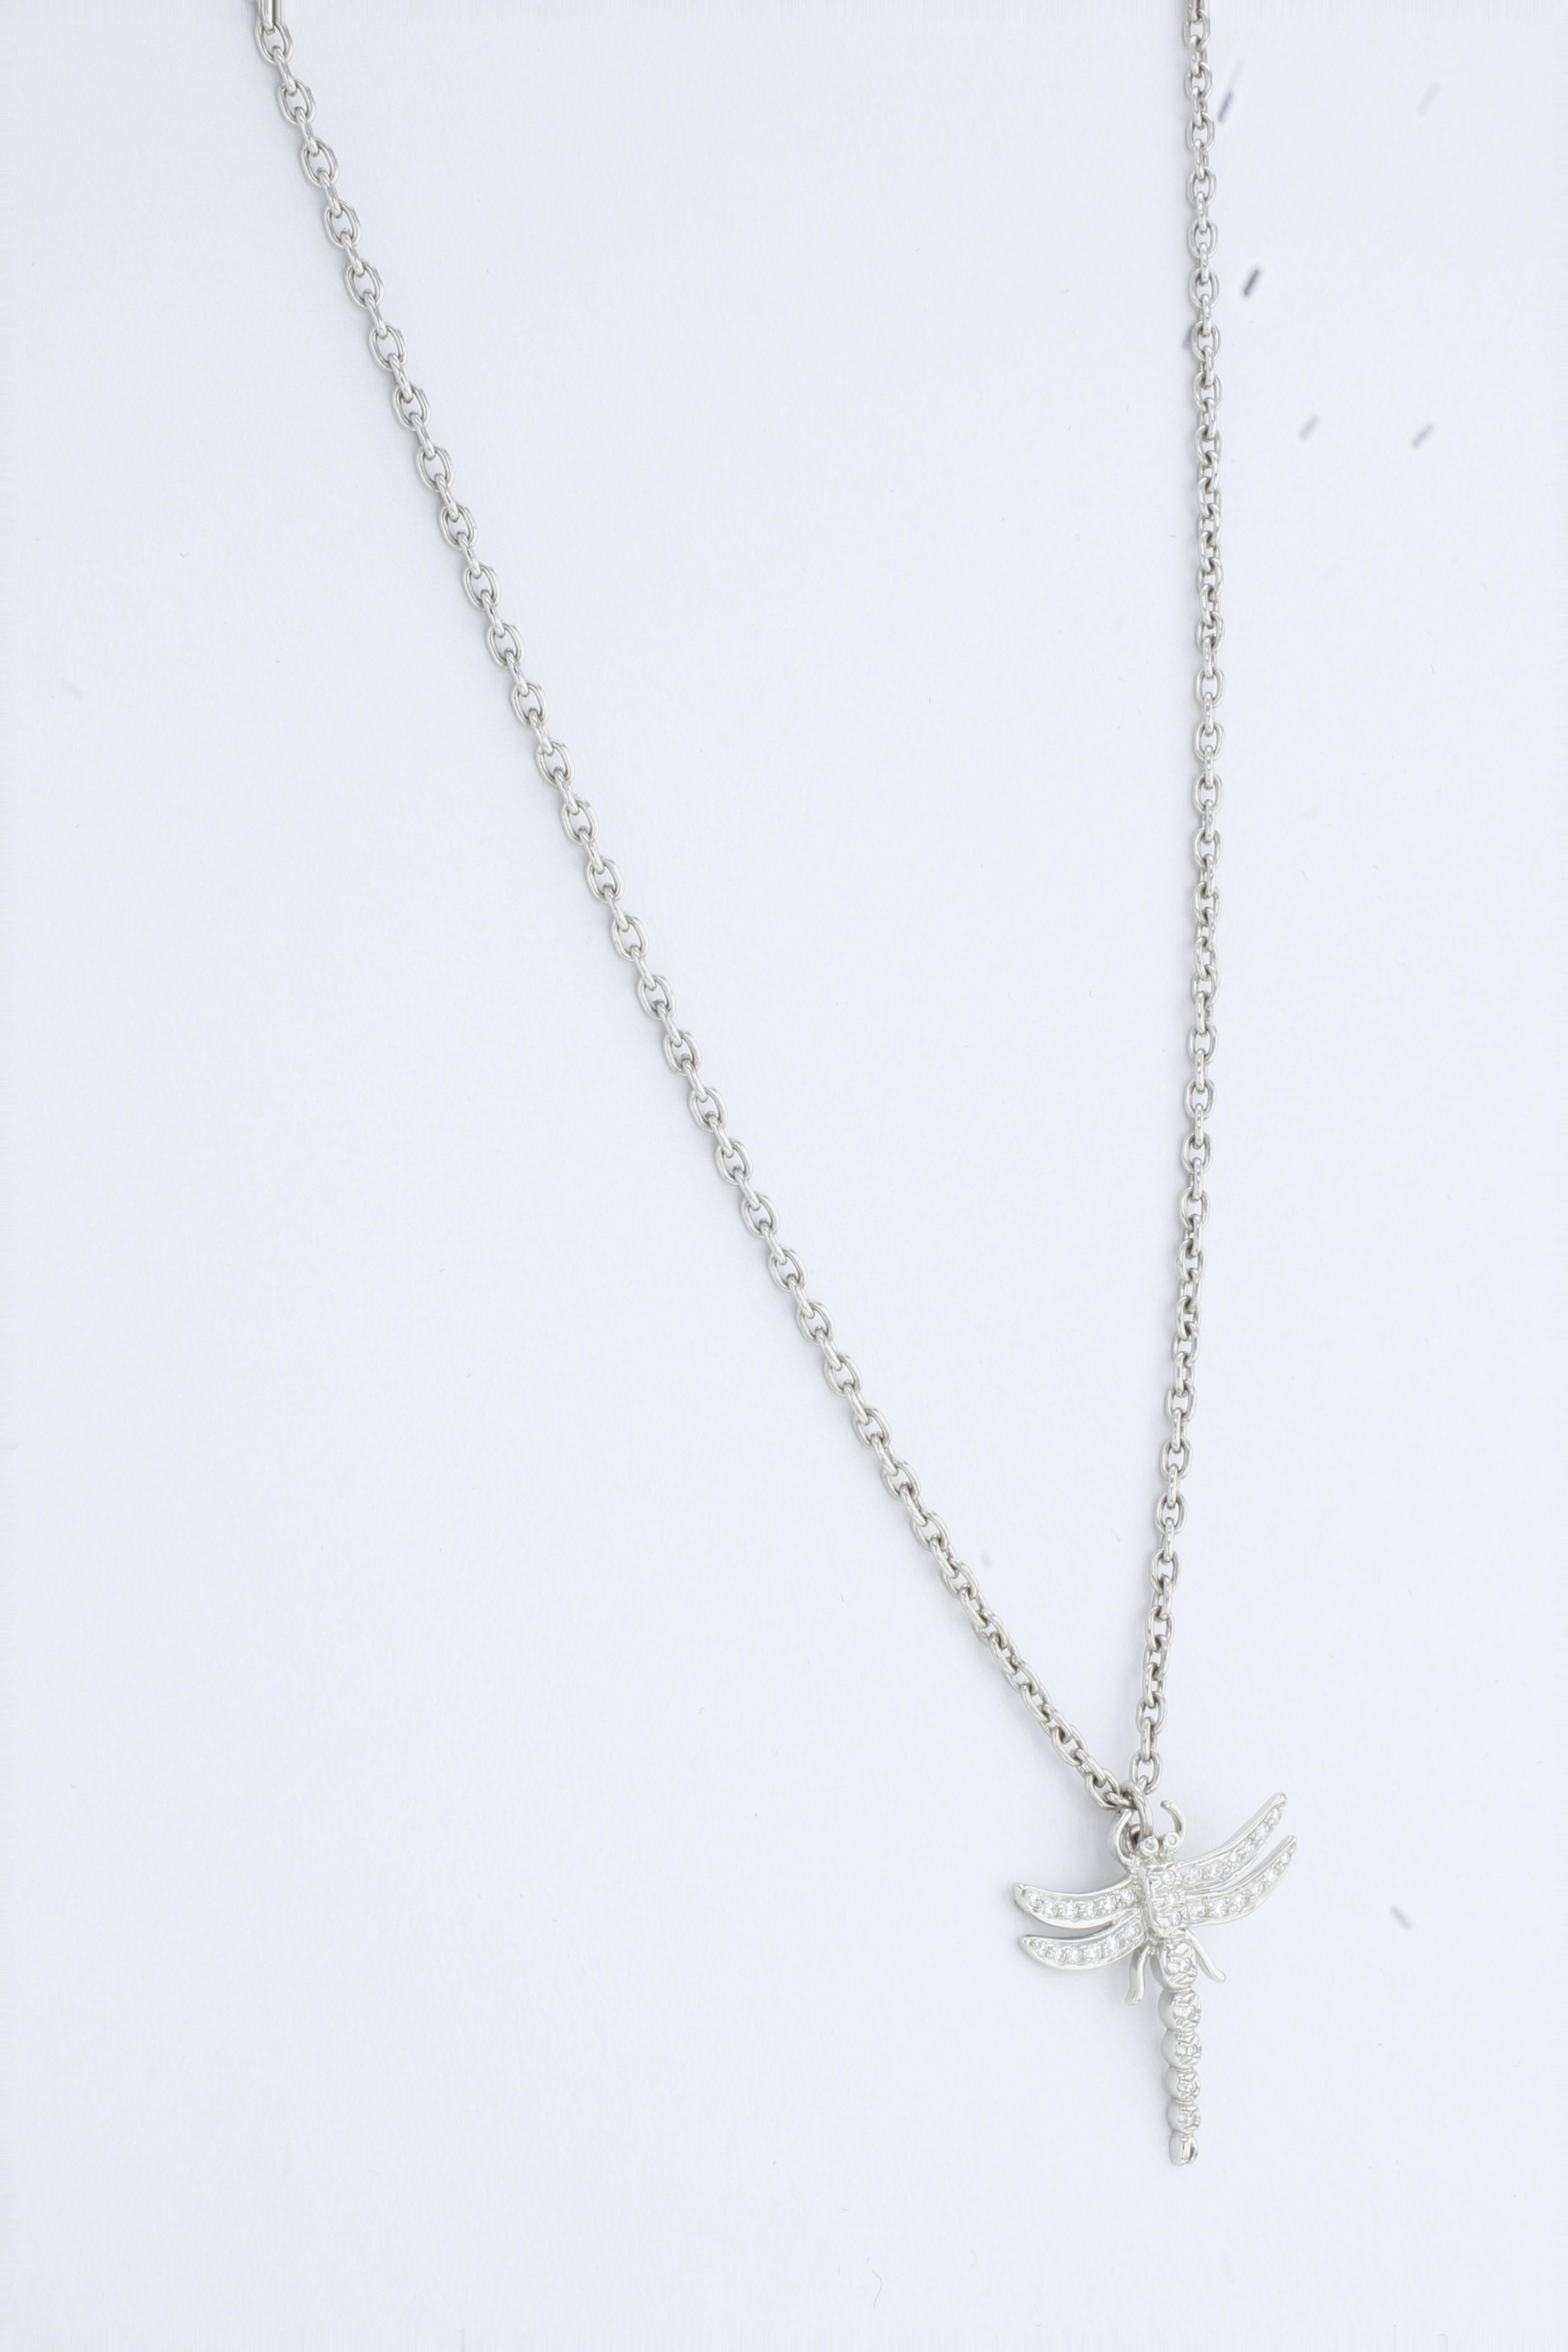 Tiffany and Co. Platinum Dragonfly Necklace 0.16 Carat at 1stDibs ...